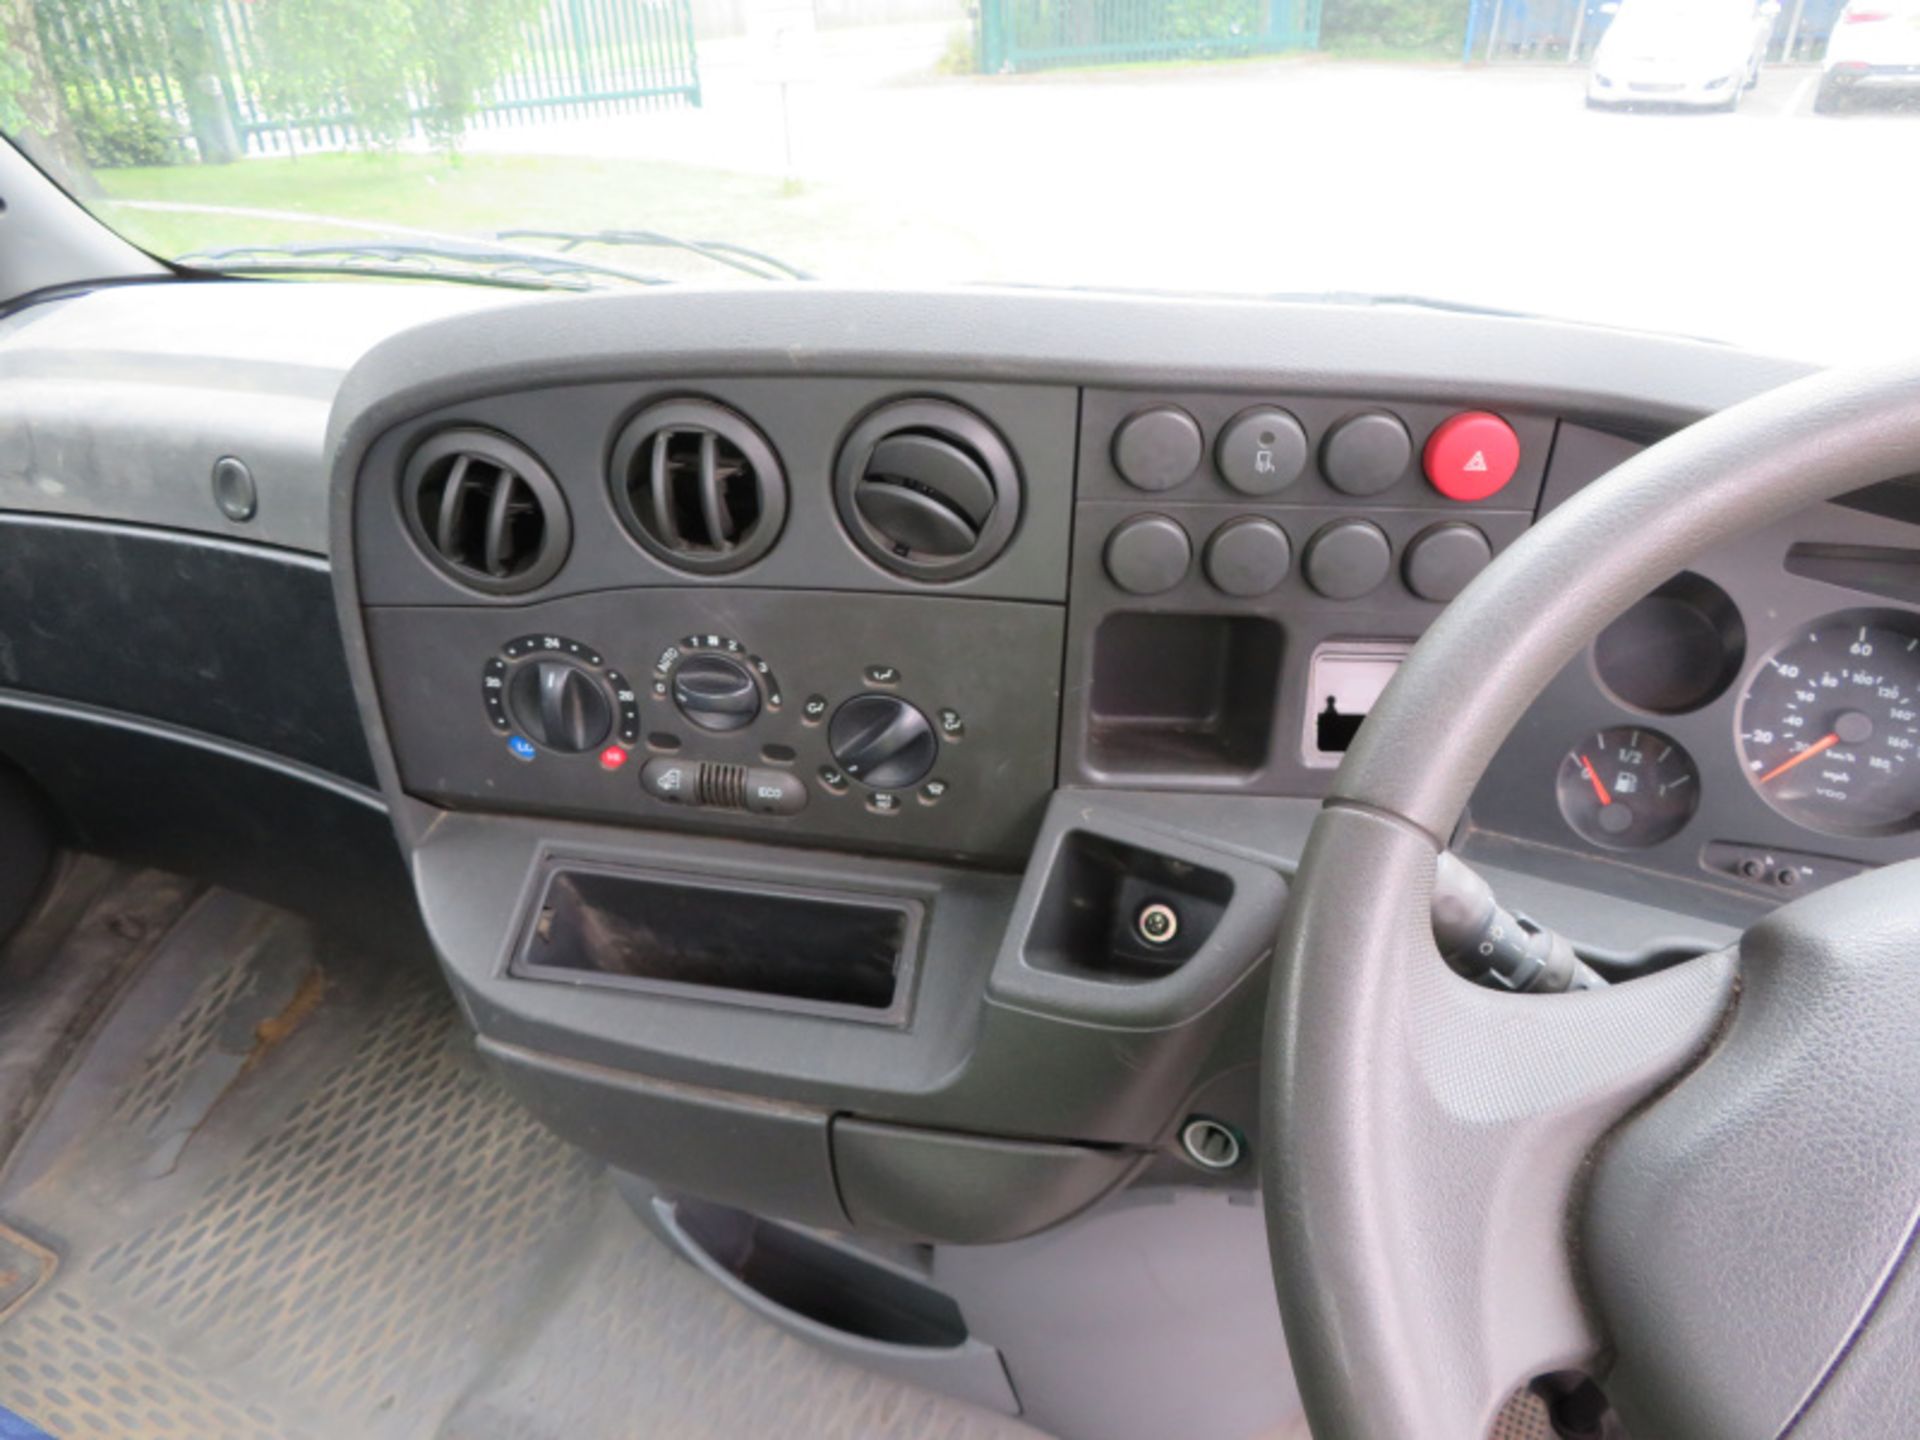 Iveco Daily drop side truck- 29L9 - diesel - year 2004 - 4 cylinder engine - Image 10 of 15